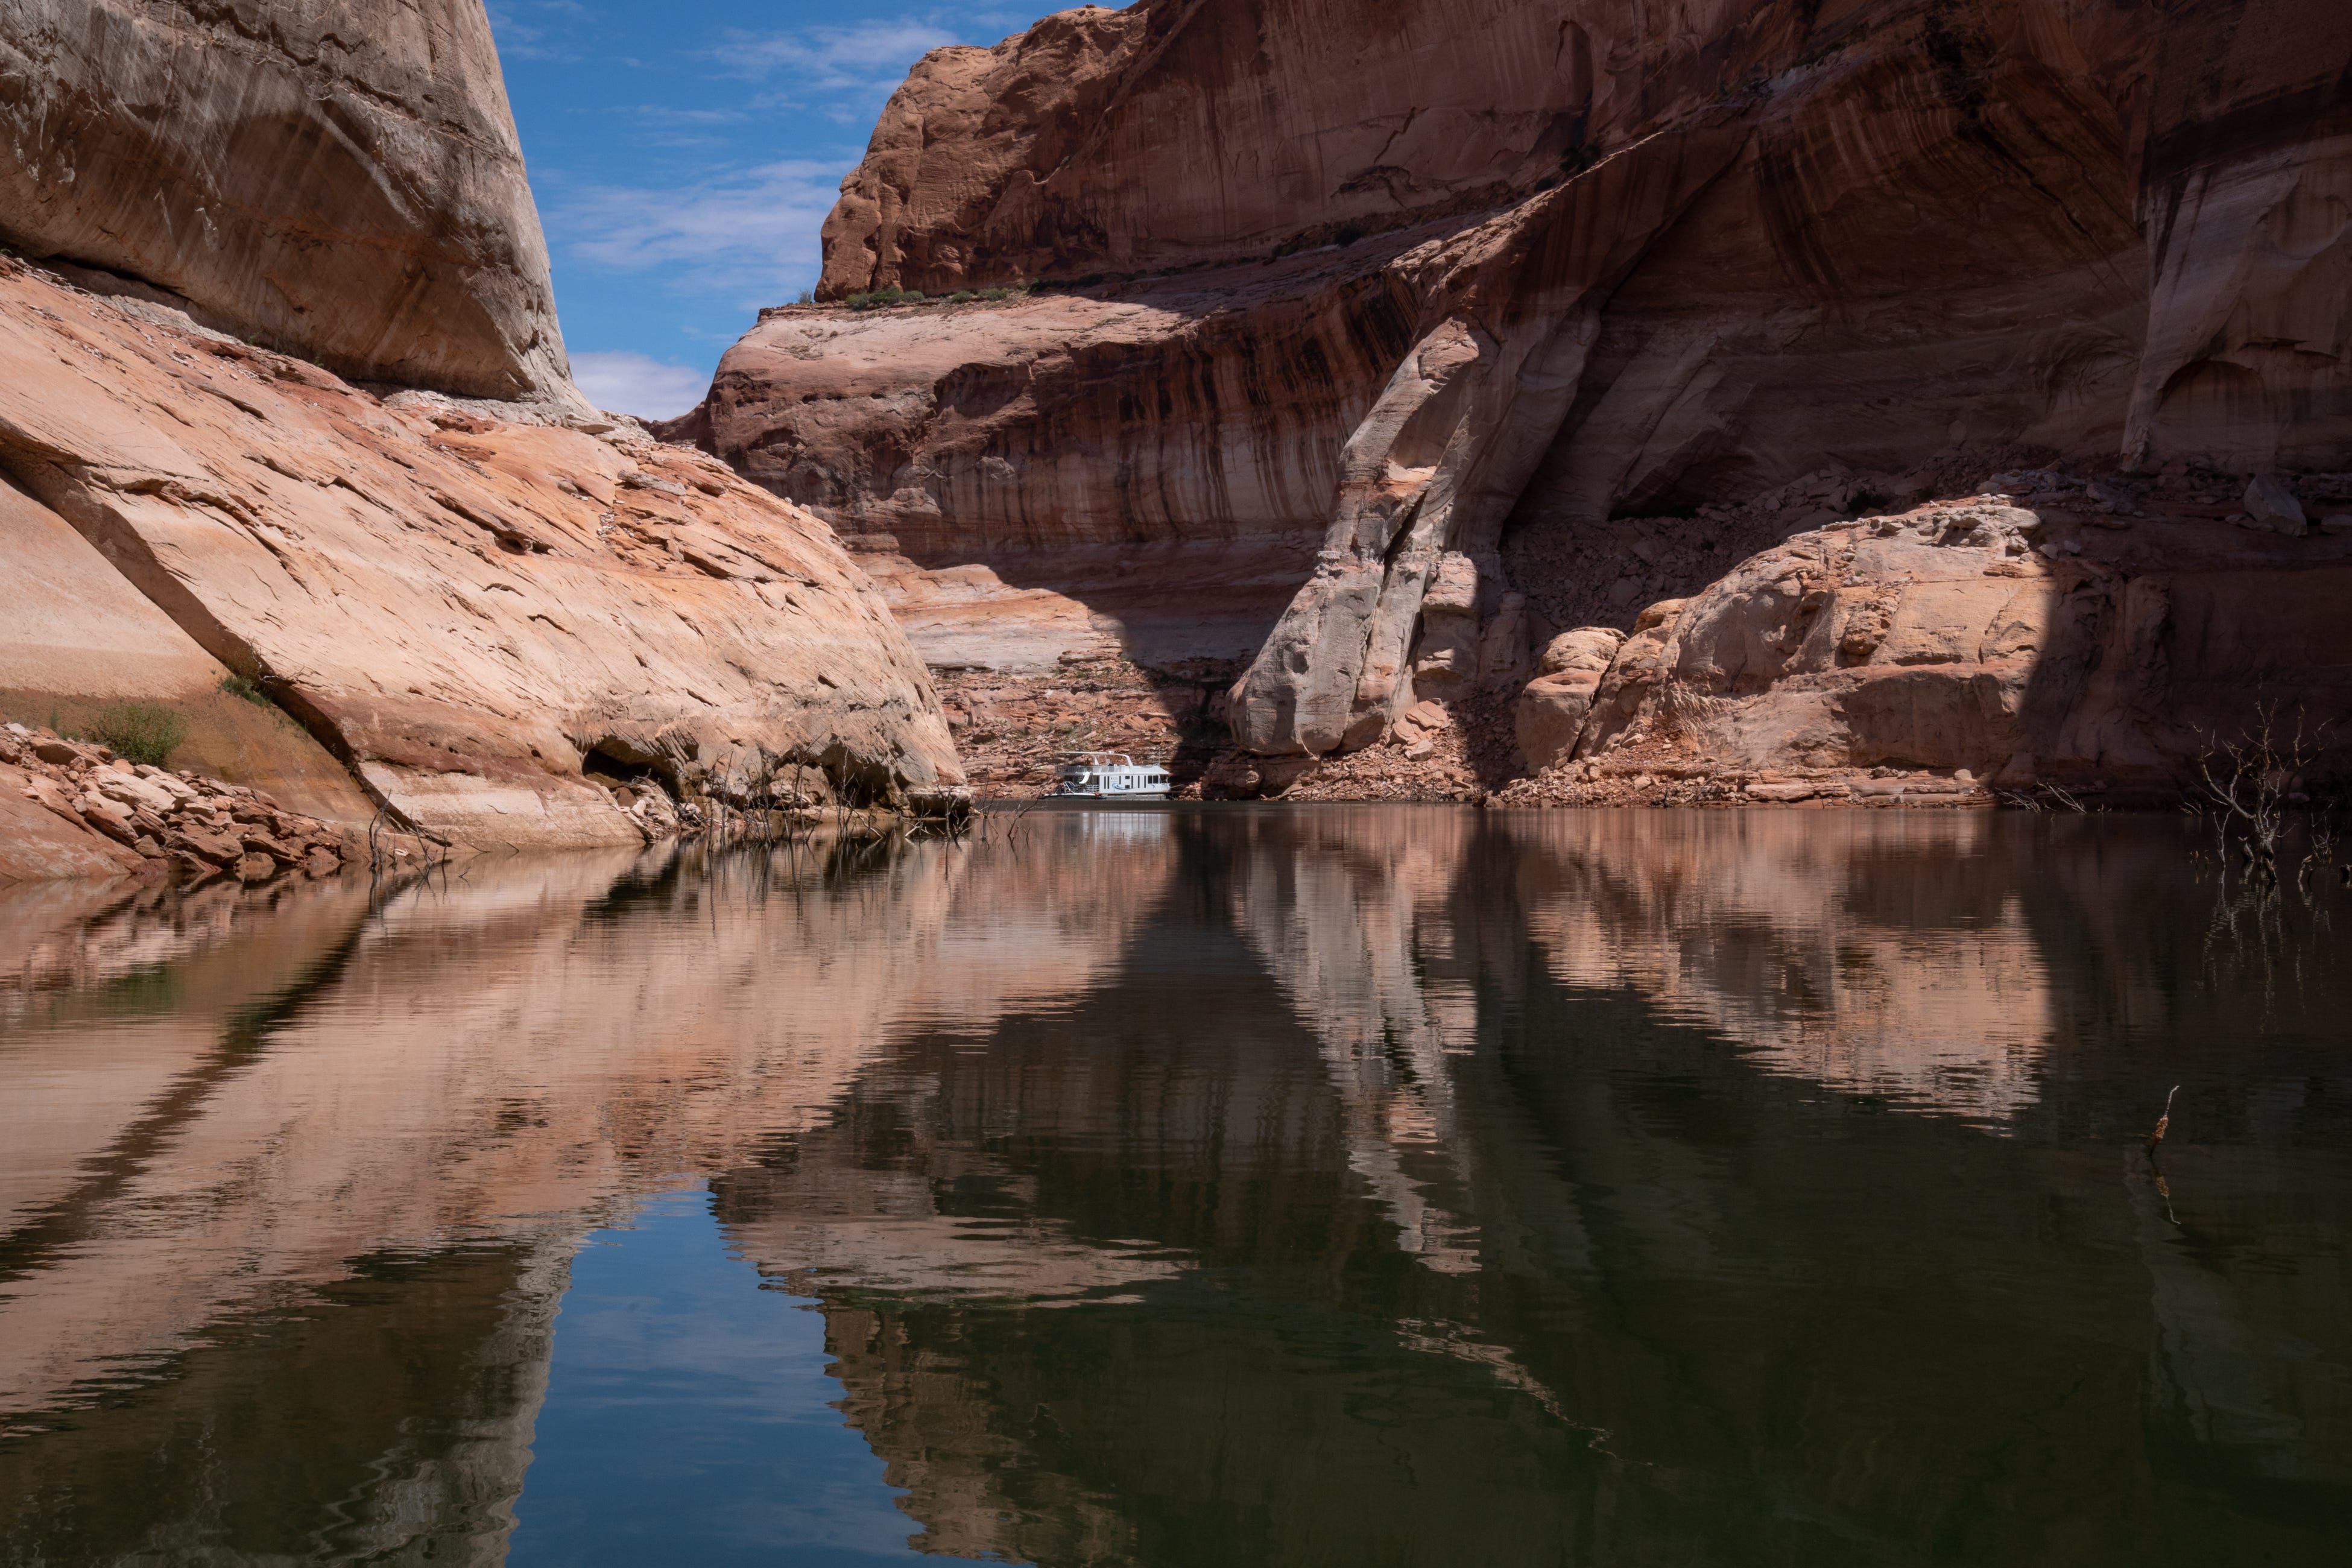 A houseboat is anchored on Clear Creek at Lake Powell on Aug. 16, 2022. The future of Lake Powell, including its recreation opportunities, is uncertain after years of decreasing water levels.